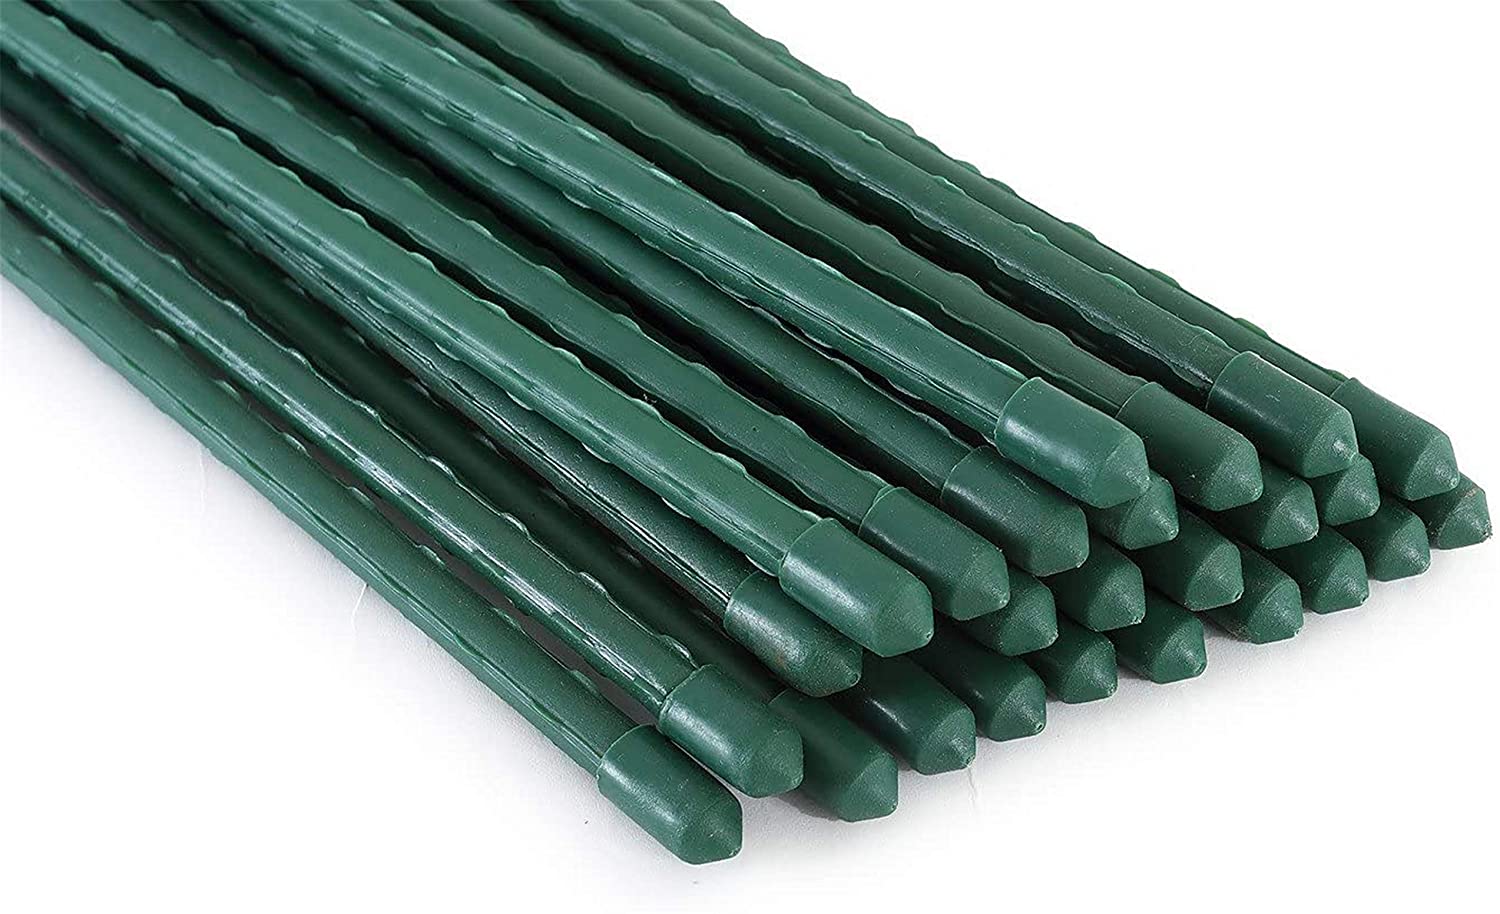 Tingyuan Plastic Coated Steel Garden Fence Stakes, 25-Piece